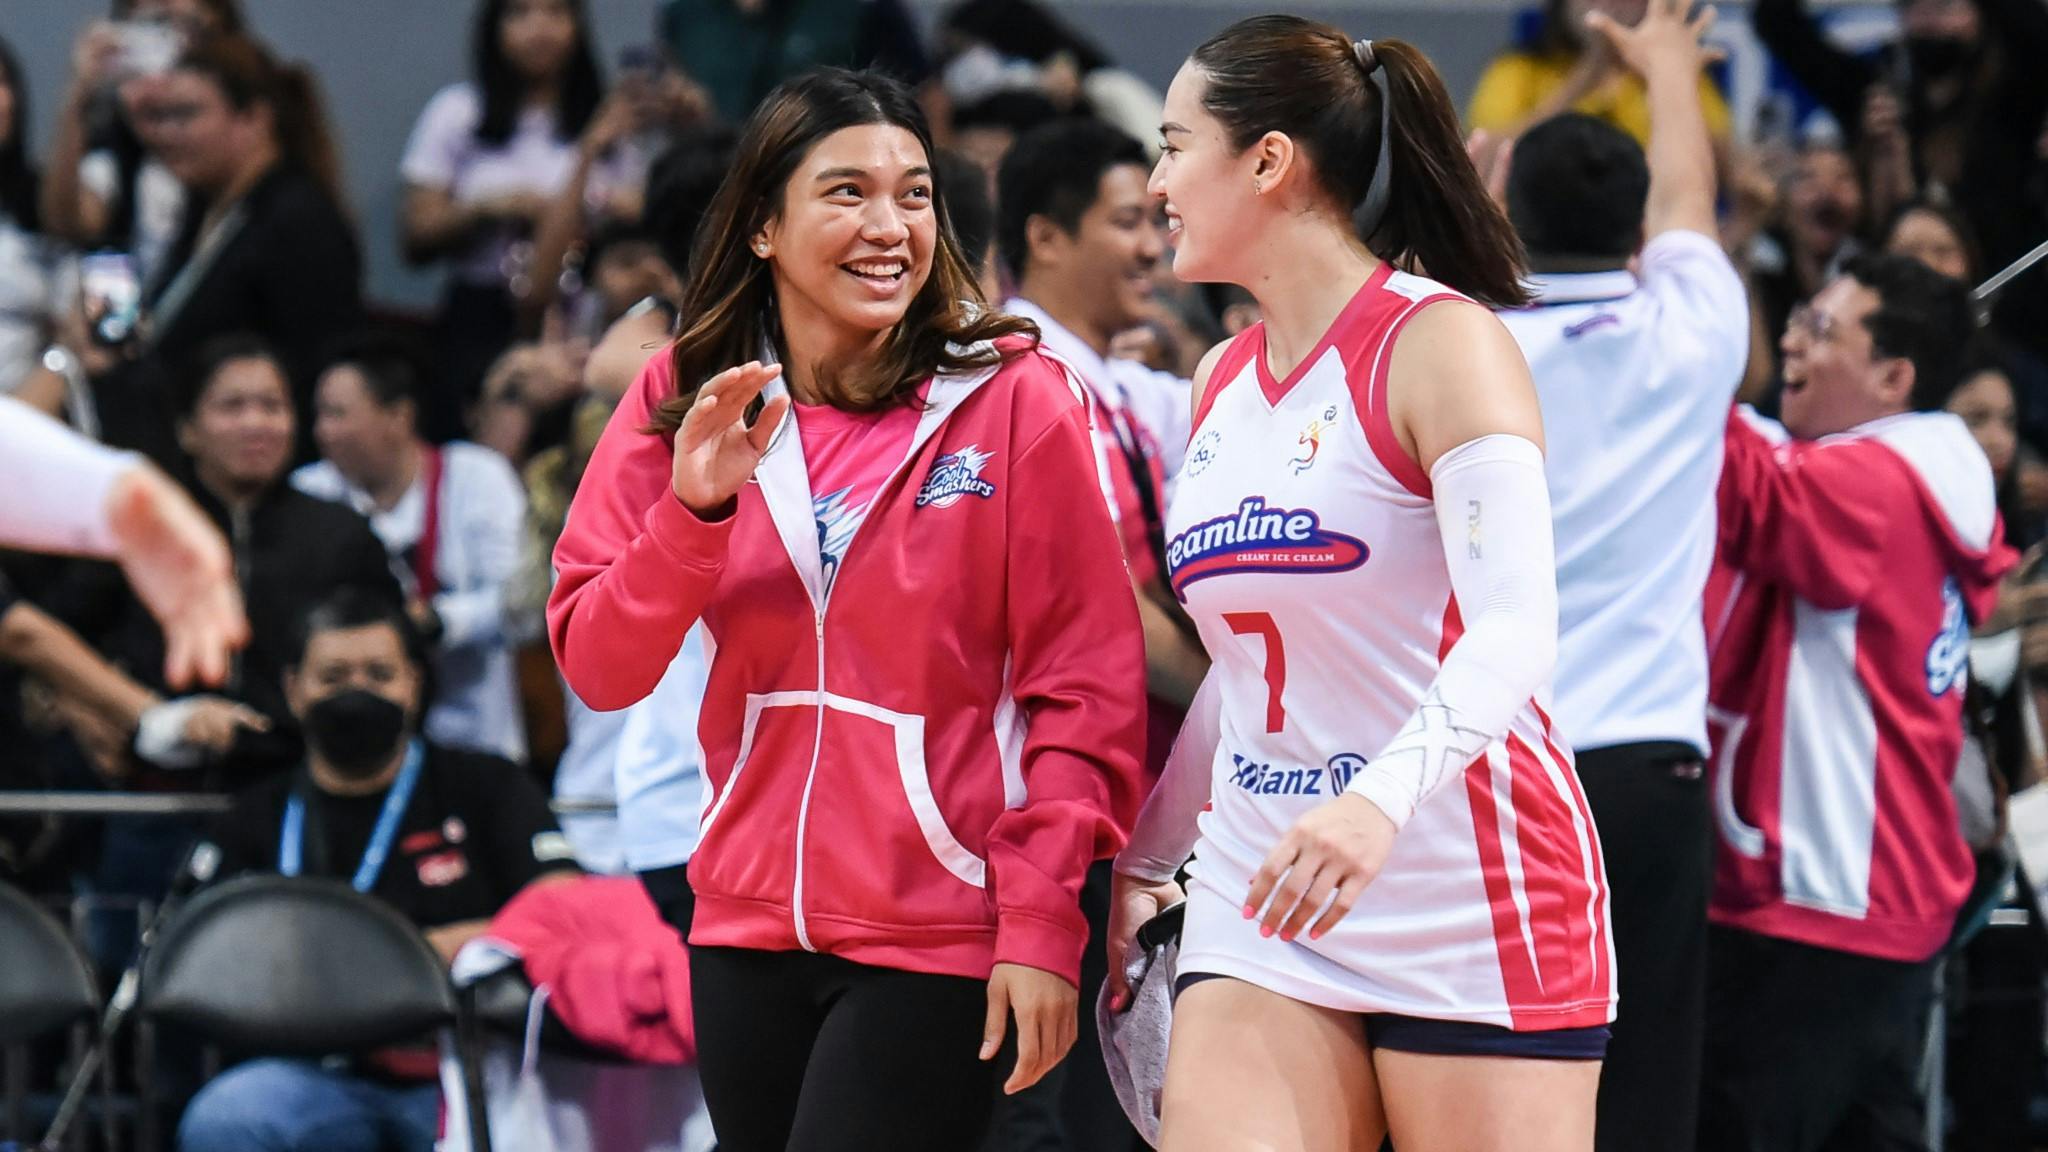 Assistant coach Ly? Creamline